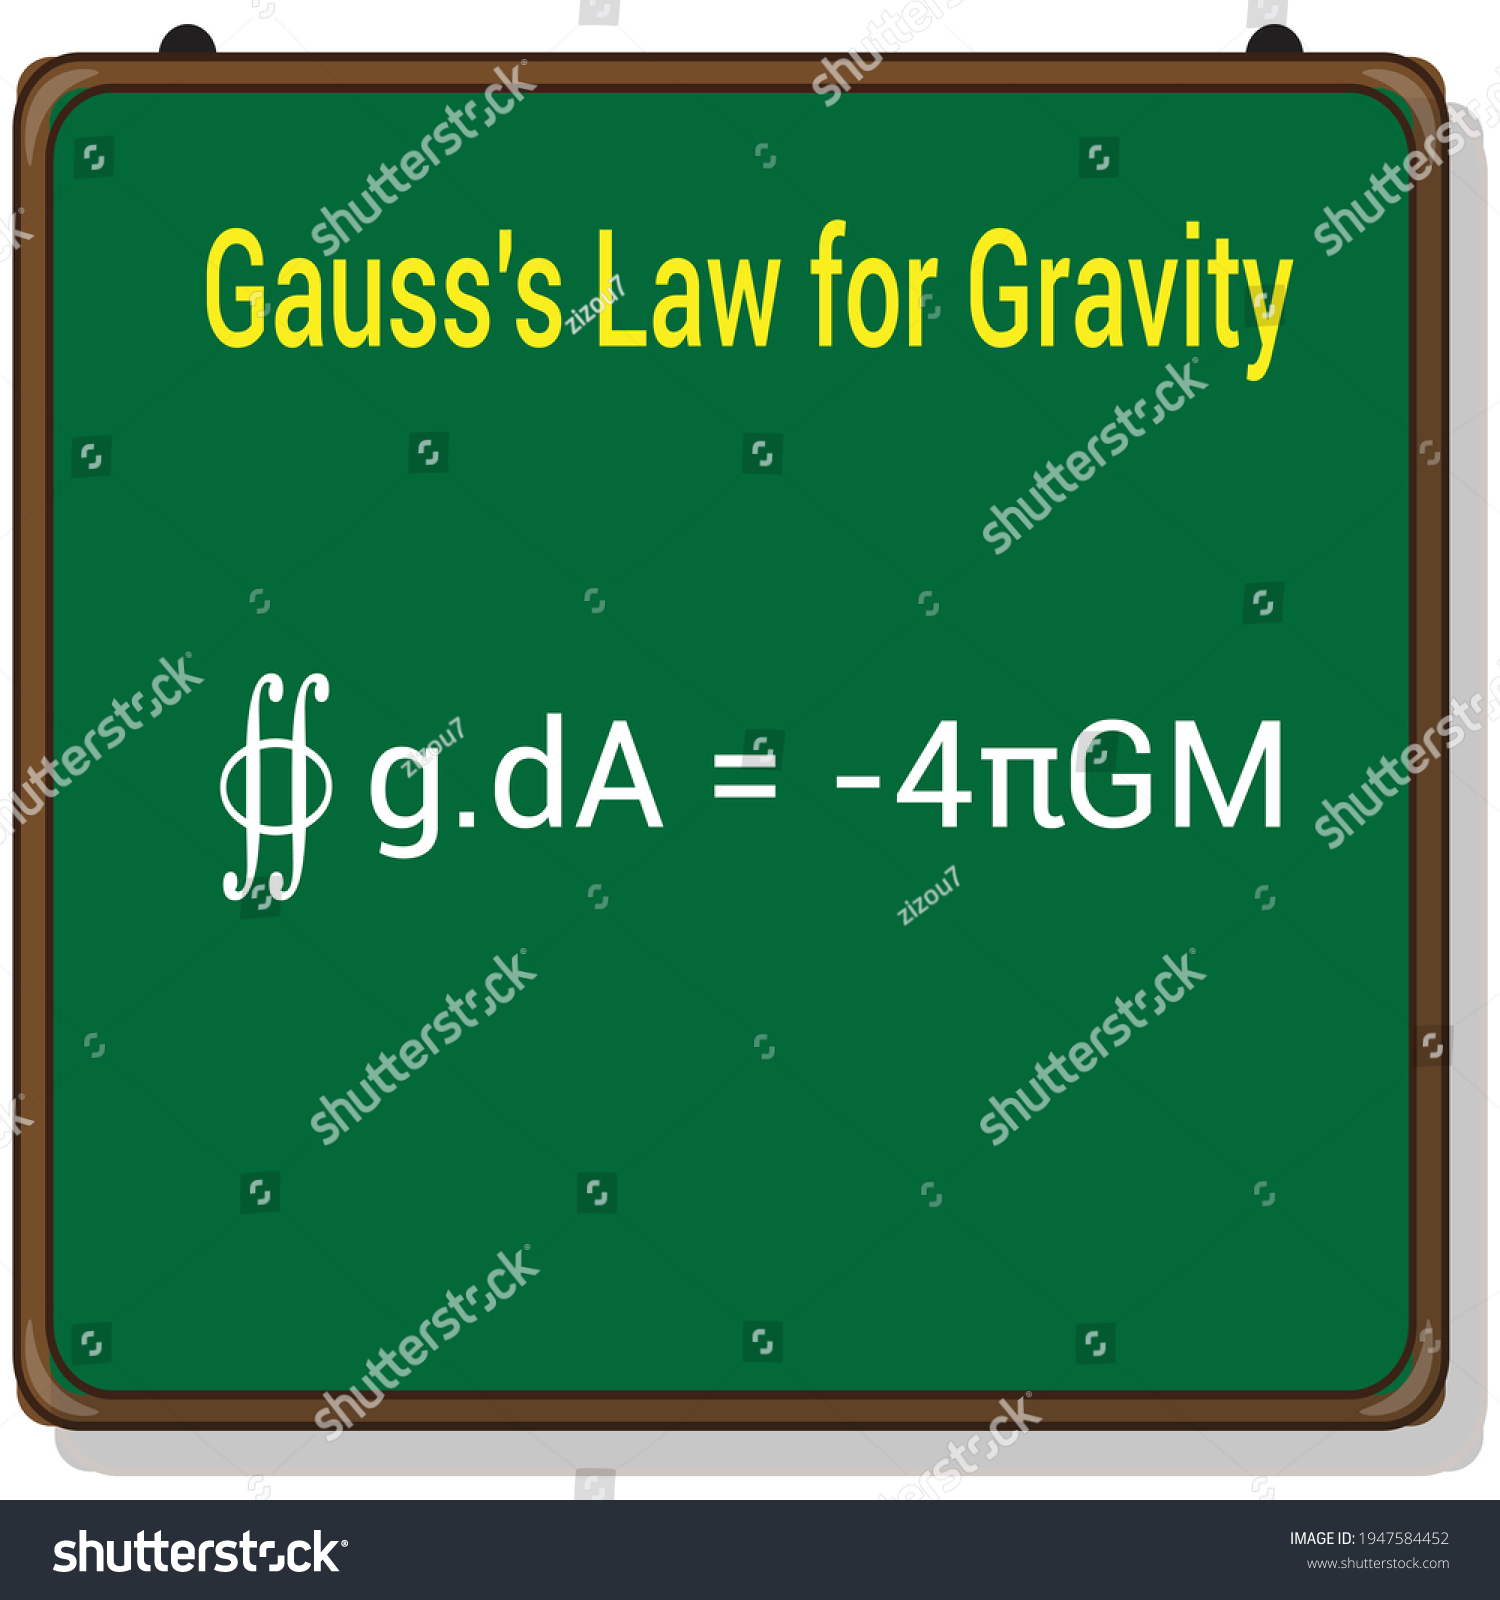 Gausss Law For Gravity Equation Royalty Free Stock Vector 1947584452 0044